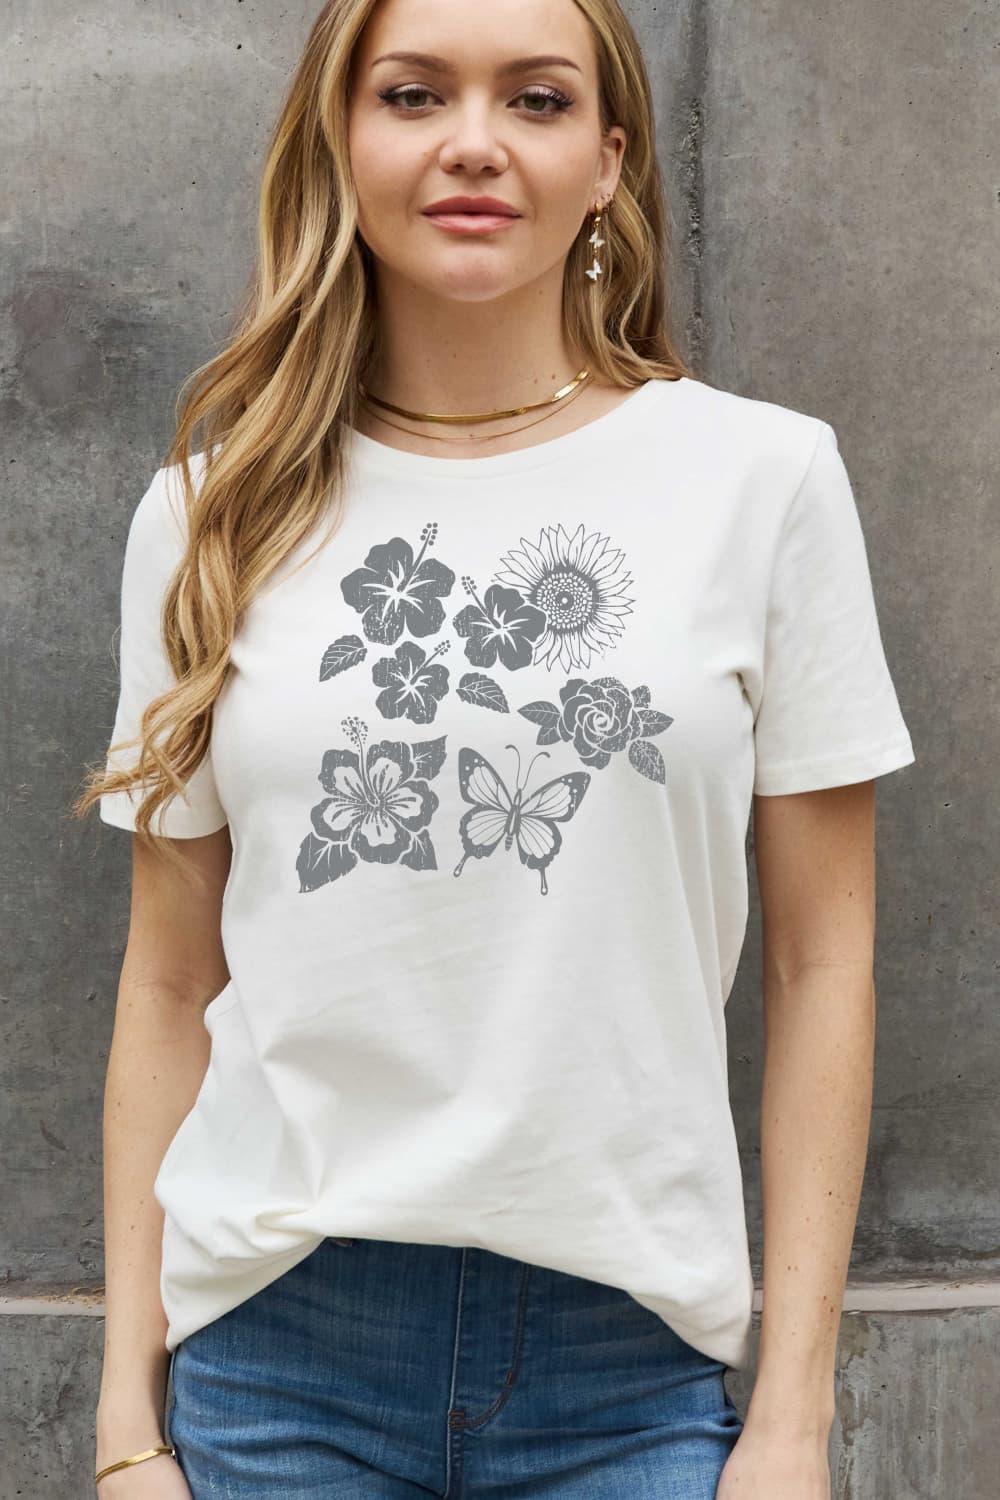 Slate Gray Simply Love Full Size Flower & Butterfly Graphic Cotton Tee